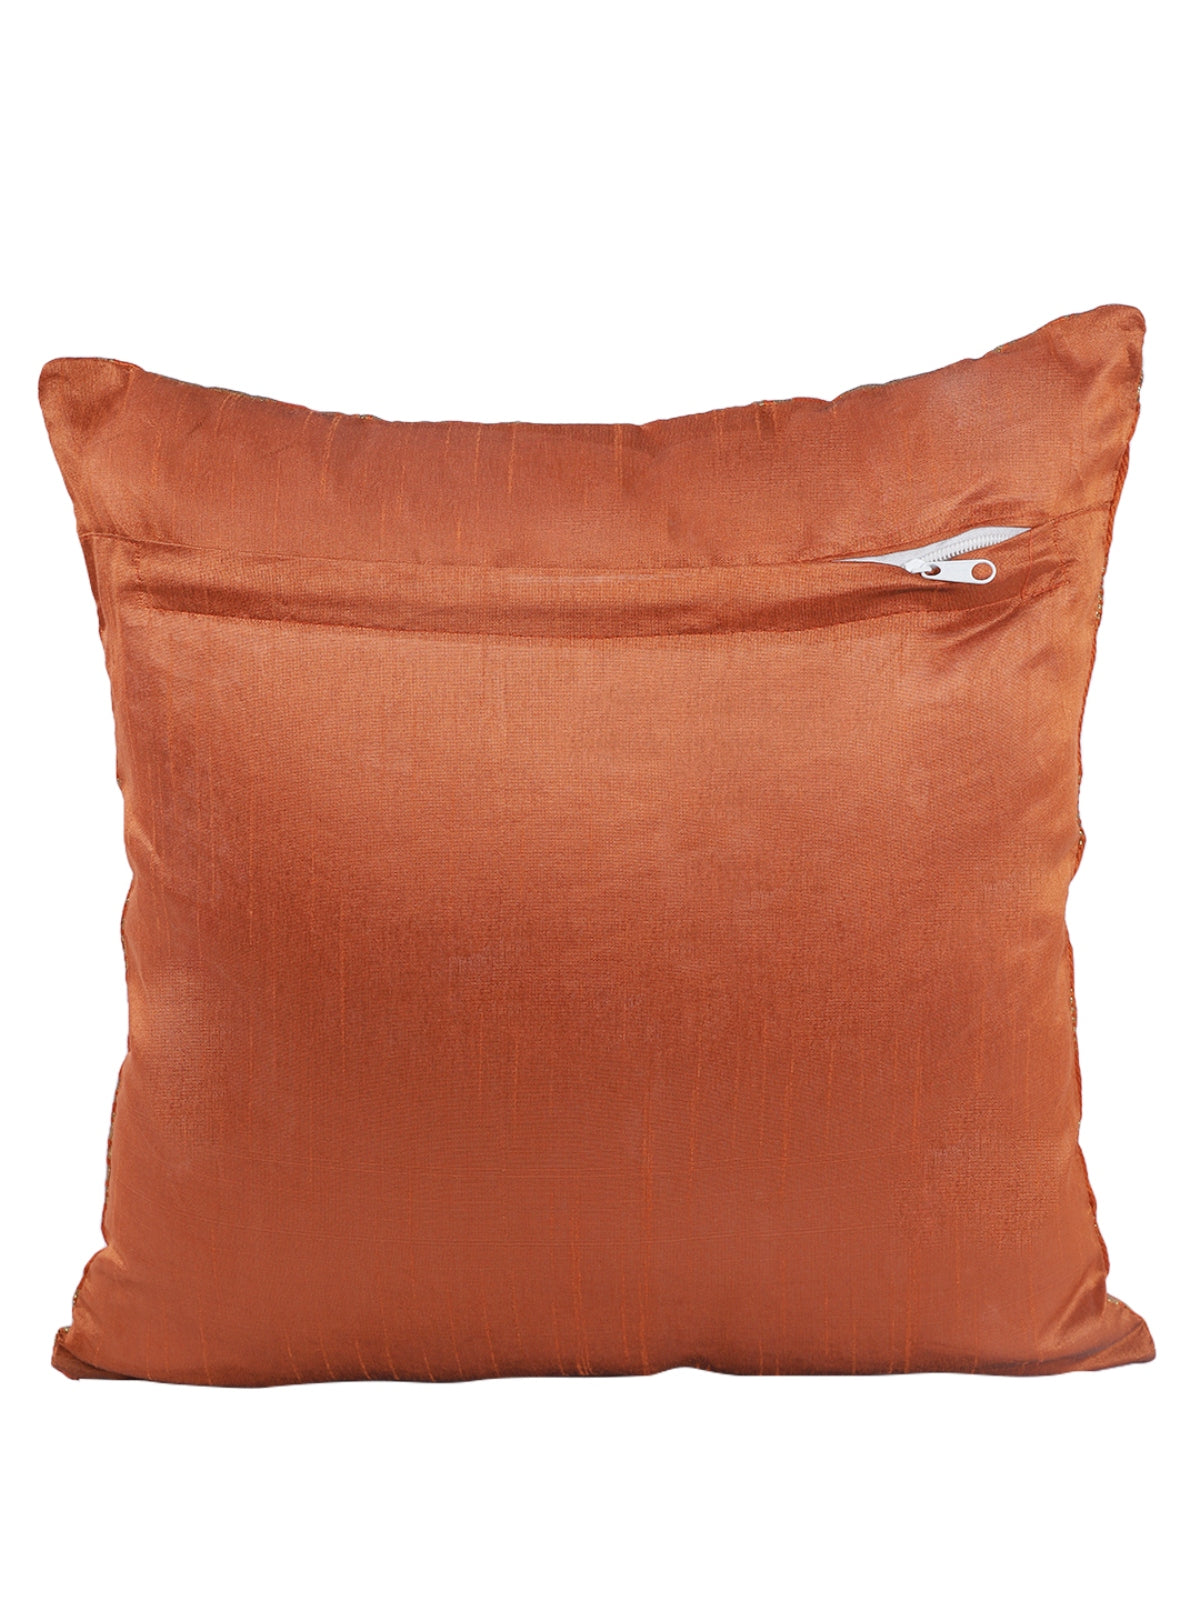 Orange & Gold Set of 5 Polyester 16 Inch x 16 Inch Cushion Covers